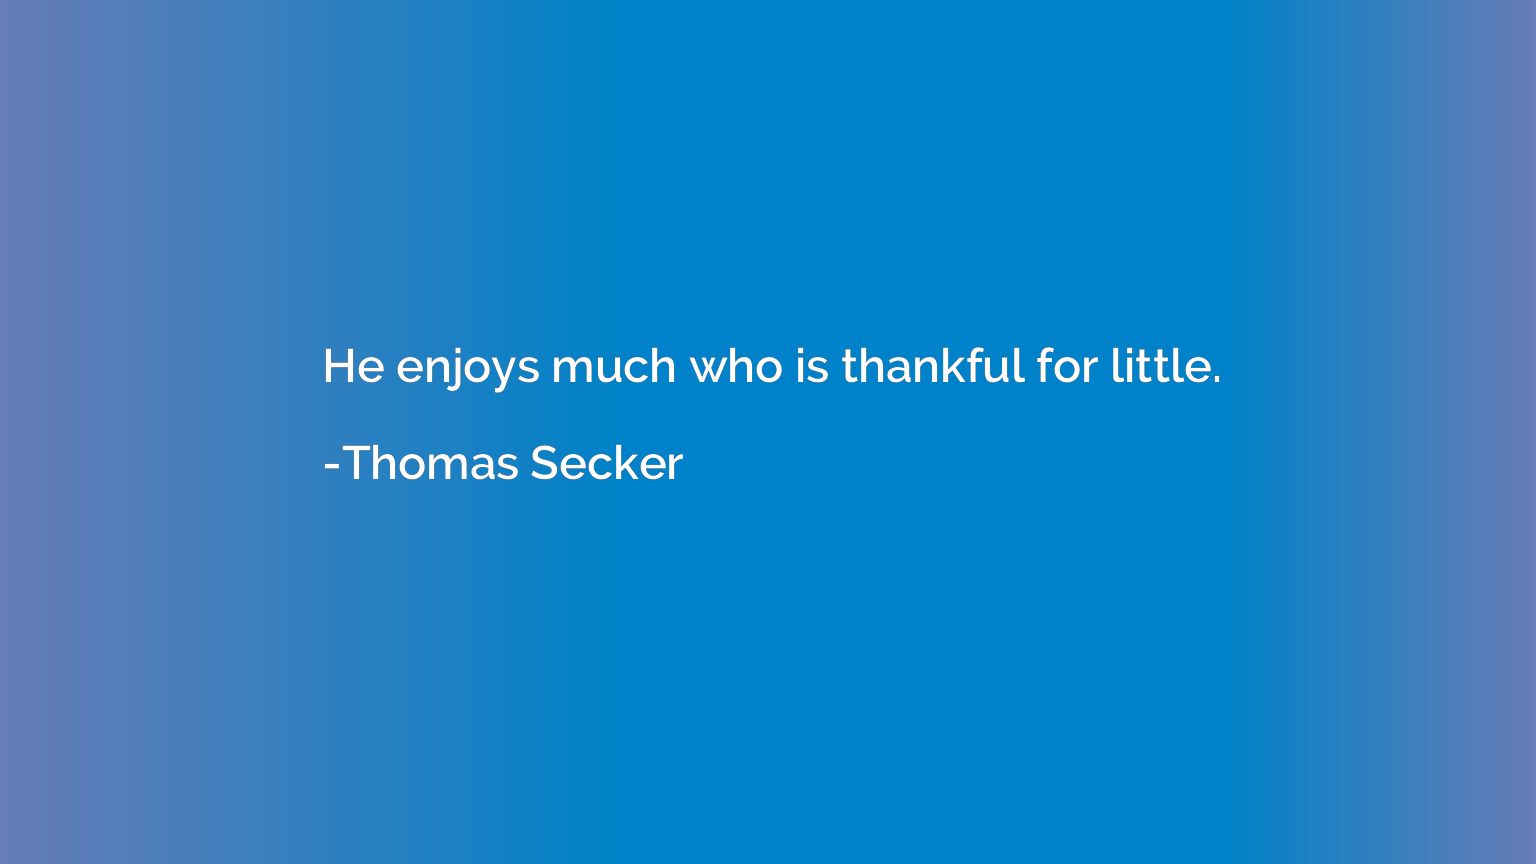 He enjoys much who is thankful for little.